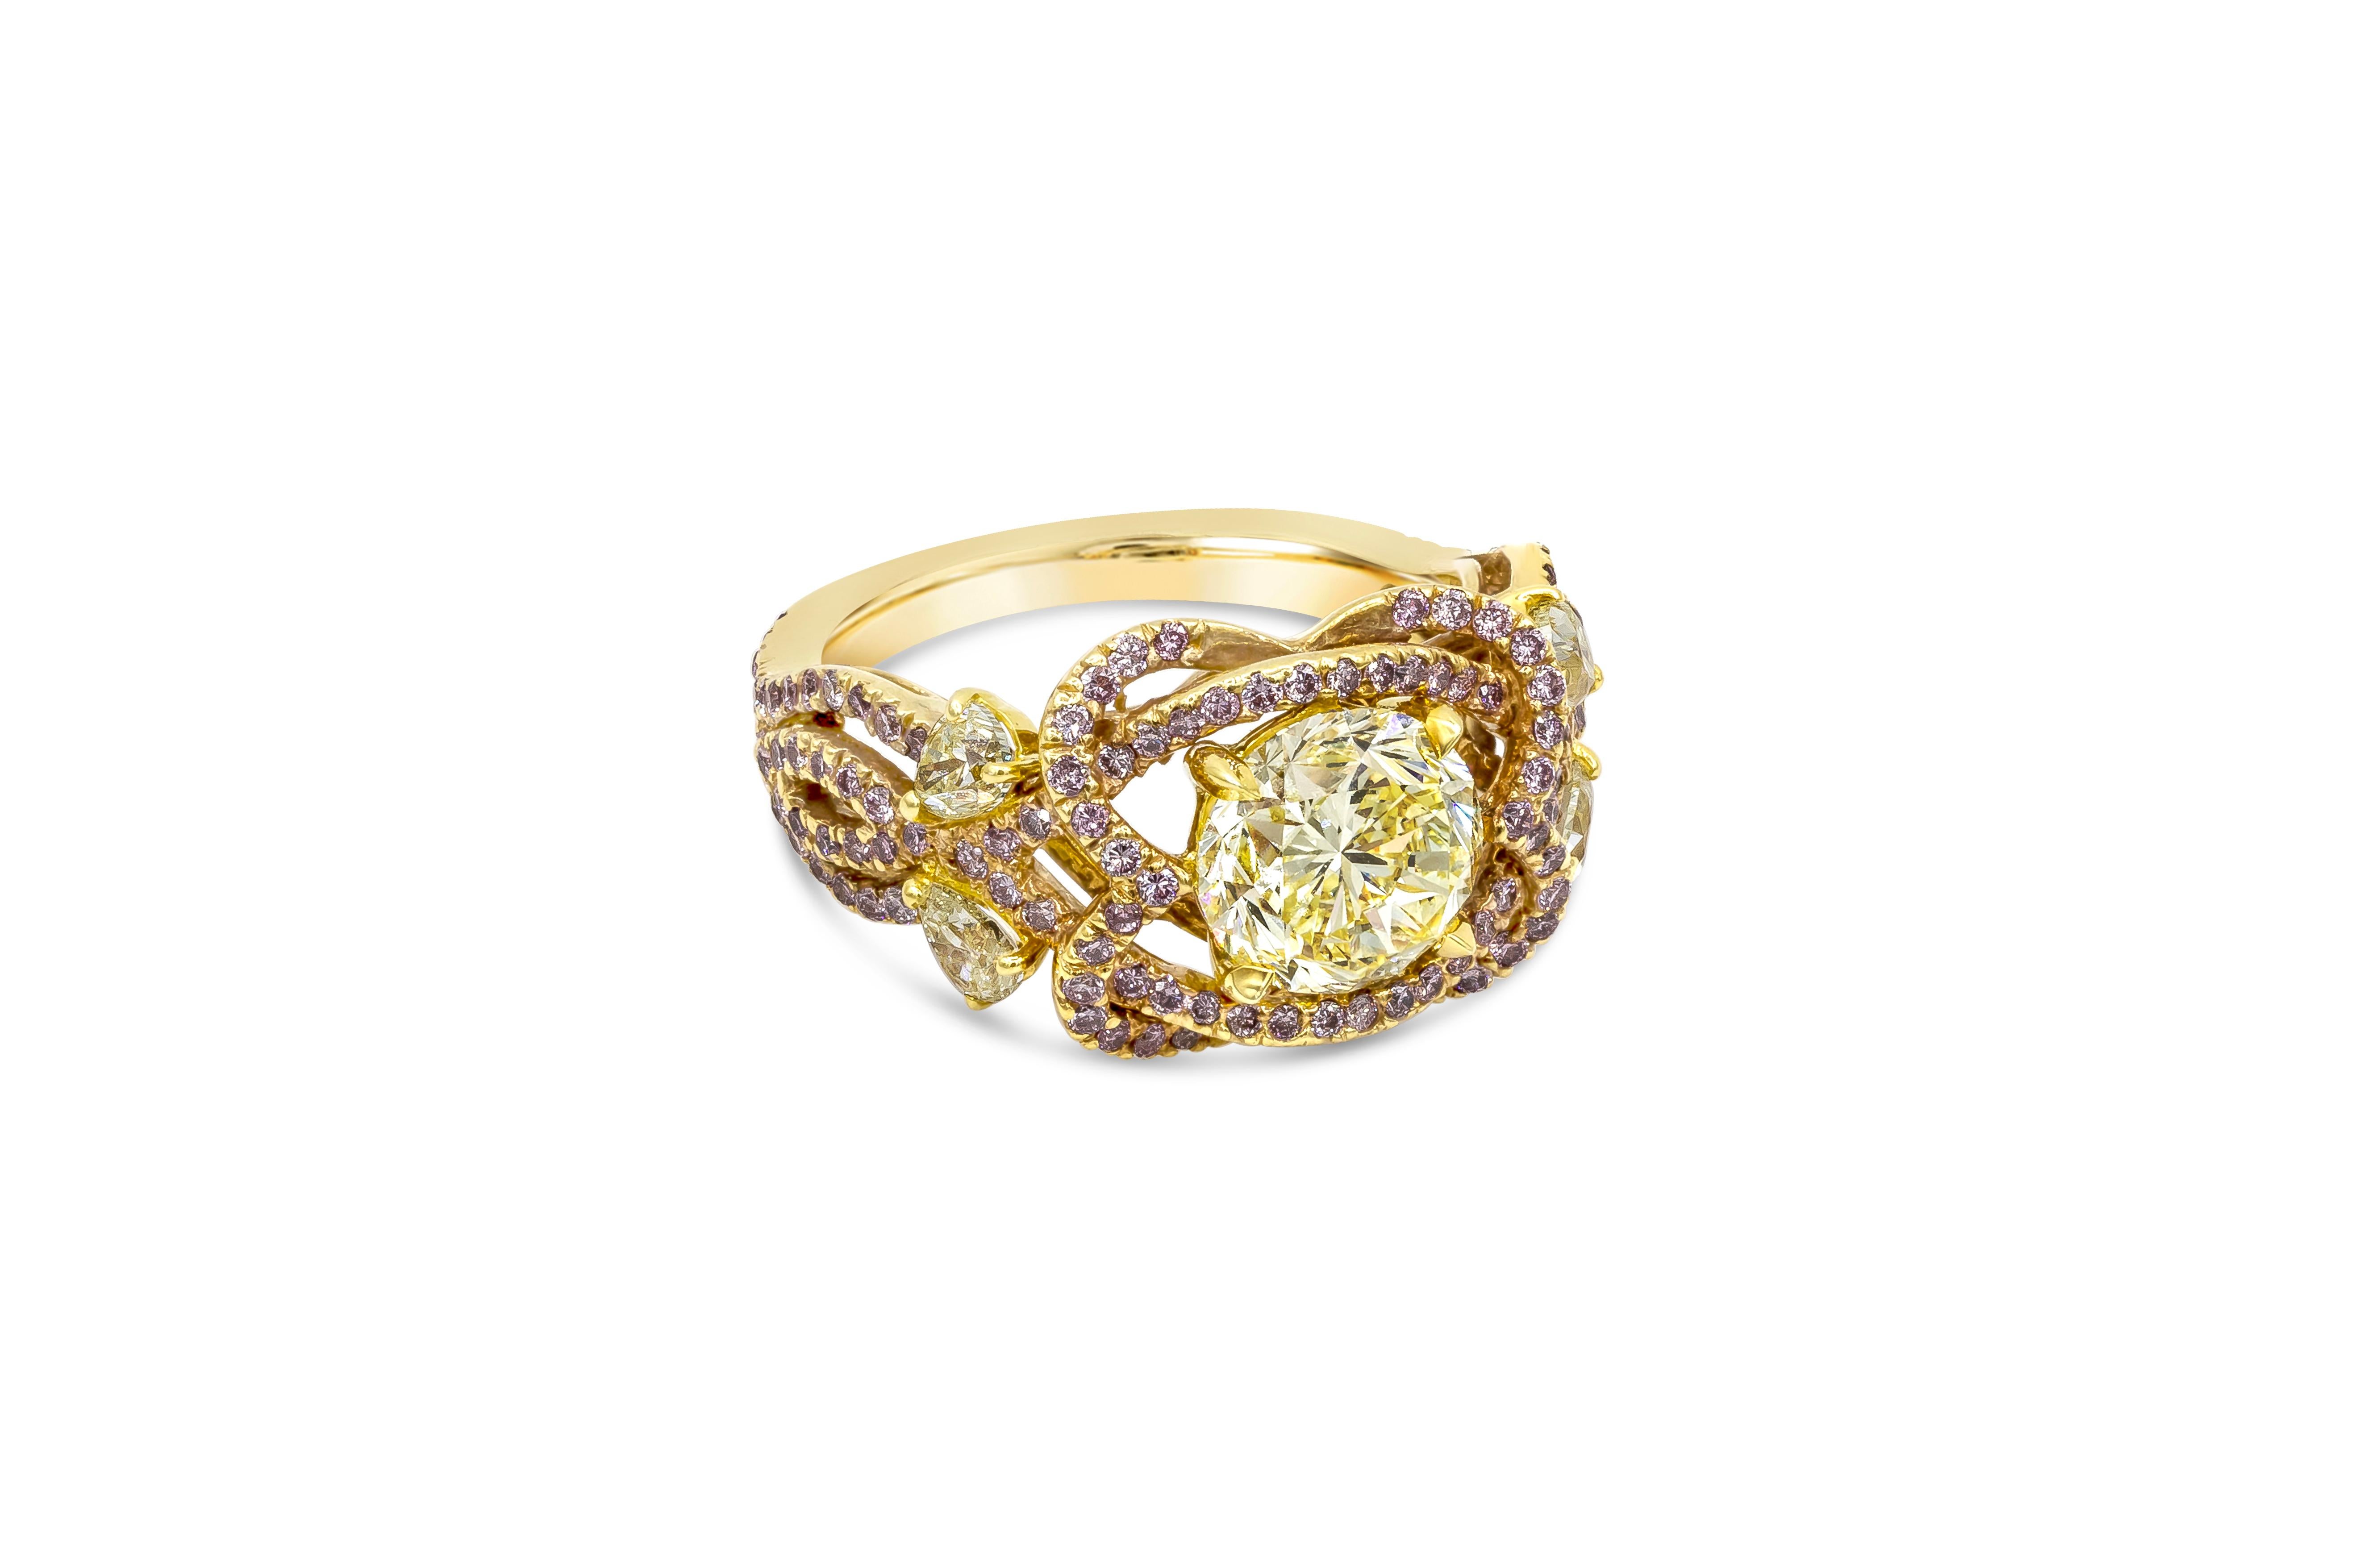 A unique and fashionable engagement ring, showcasing a 1.97 carats round brilliant cut diamond certified by GIA as Fancy Intense Yellow color and VS1 clarity. The center diamond is set in an open-work, intricately-designed weaving band accented with